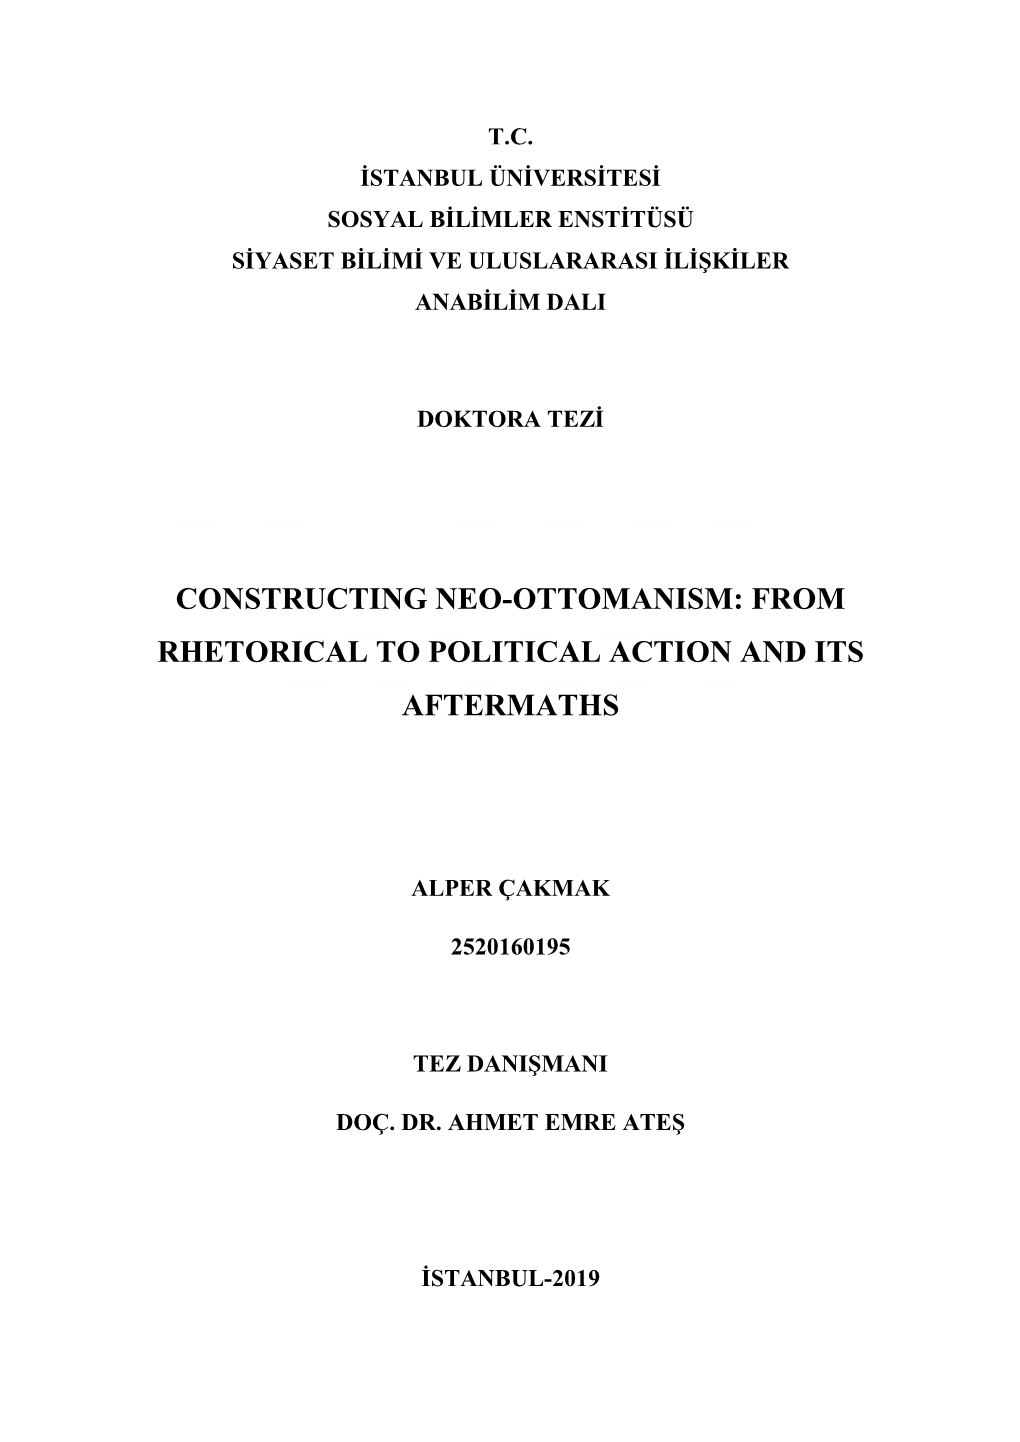 Constructing Neo-Ottomanism: from Rhetorical to Political Action and Its Aftermaths